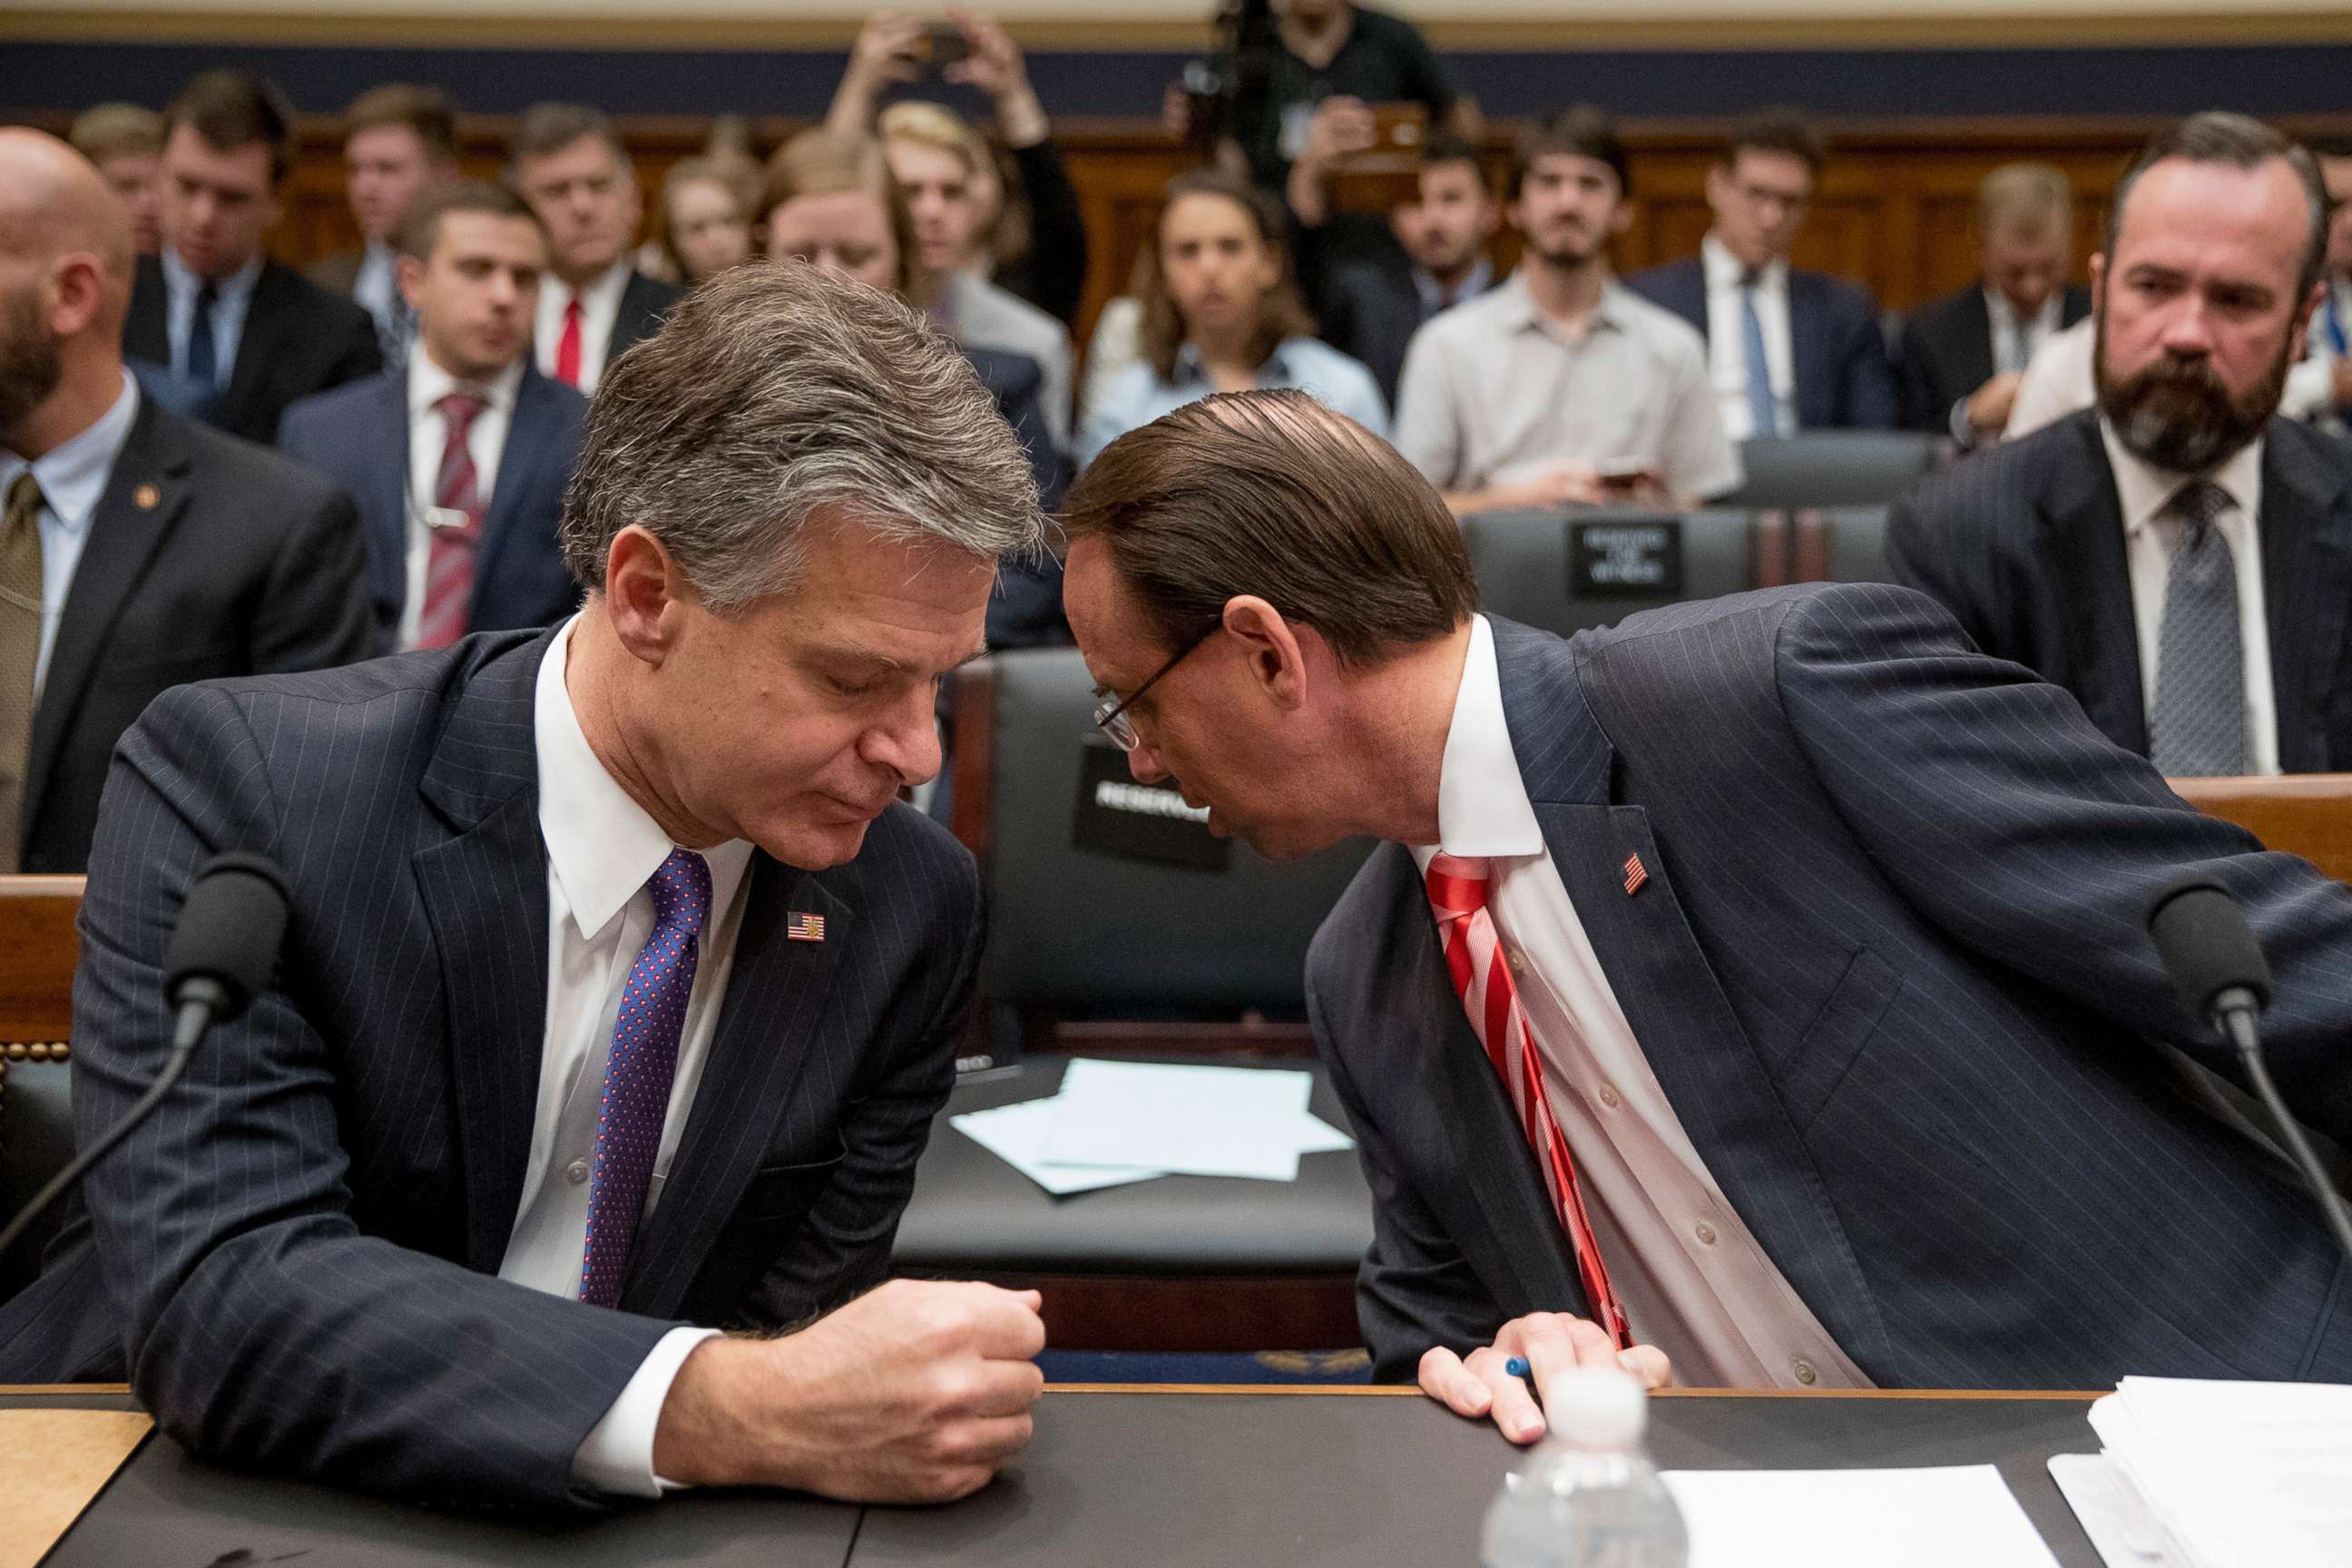 PHOTO: FBI Director Christopher Wray, left, speaks with Deputy Attorney General Rod Rosenstein during the start of the hearing on the Justice Department and FBI actions around the 2016 presidential election, June 28, 2018, in Washington, D.C.